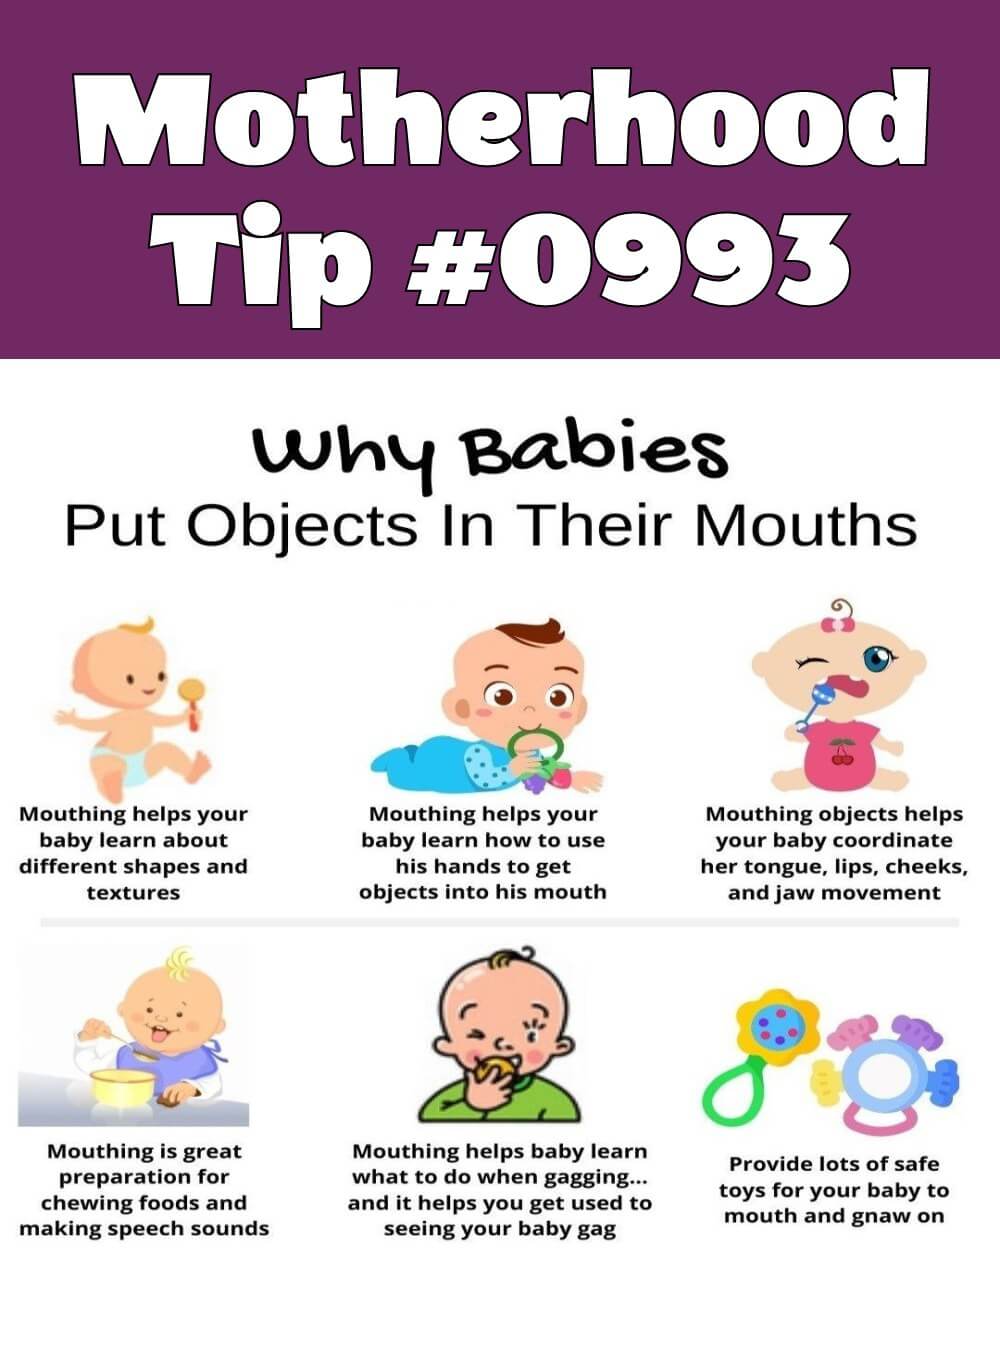 Parenting and Pregnancy Infographic | Motherhood Tip #0993